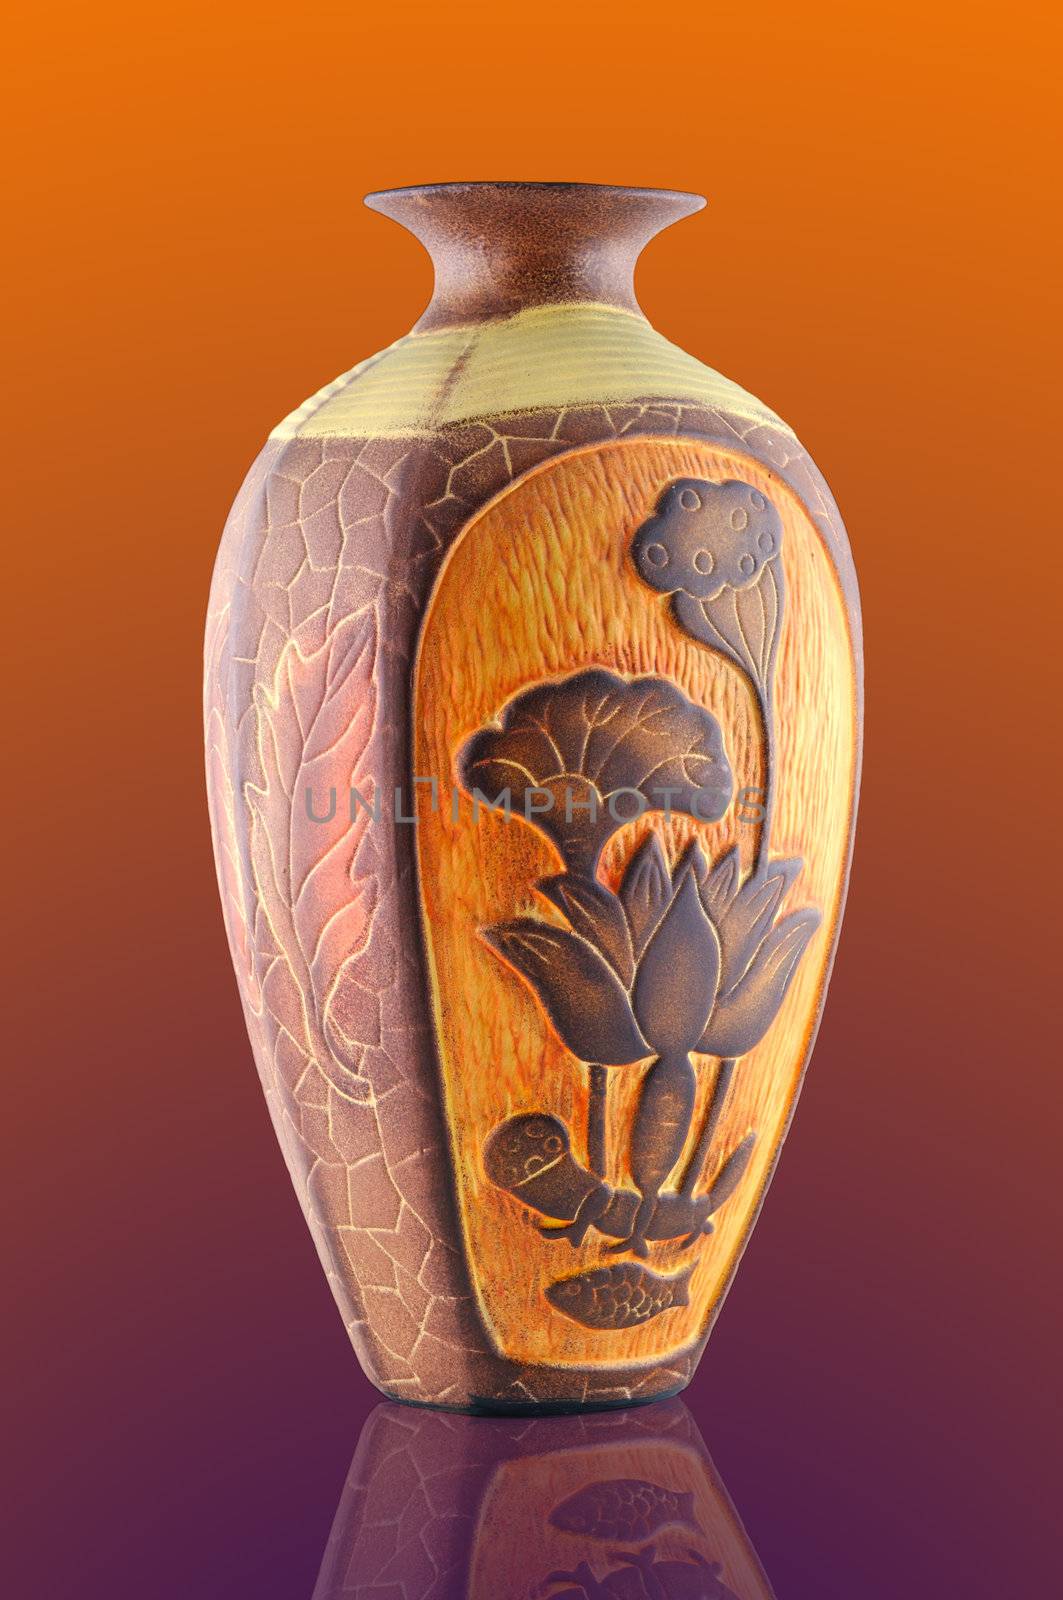 Highly decorative ceramic flower vase decorated with a beautiful, against a white background